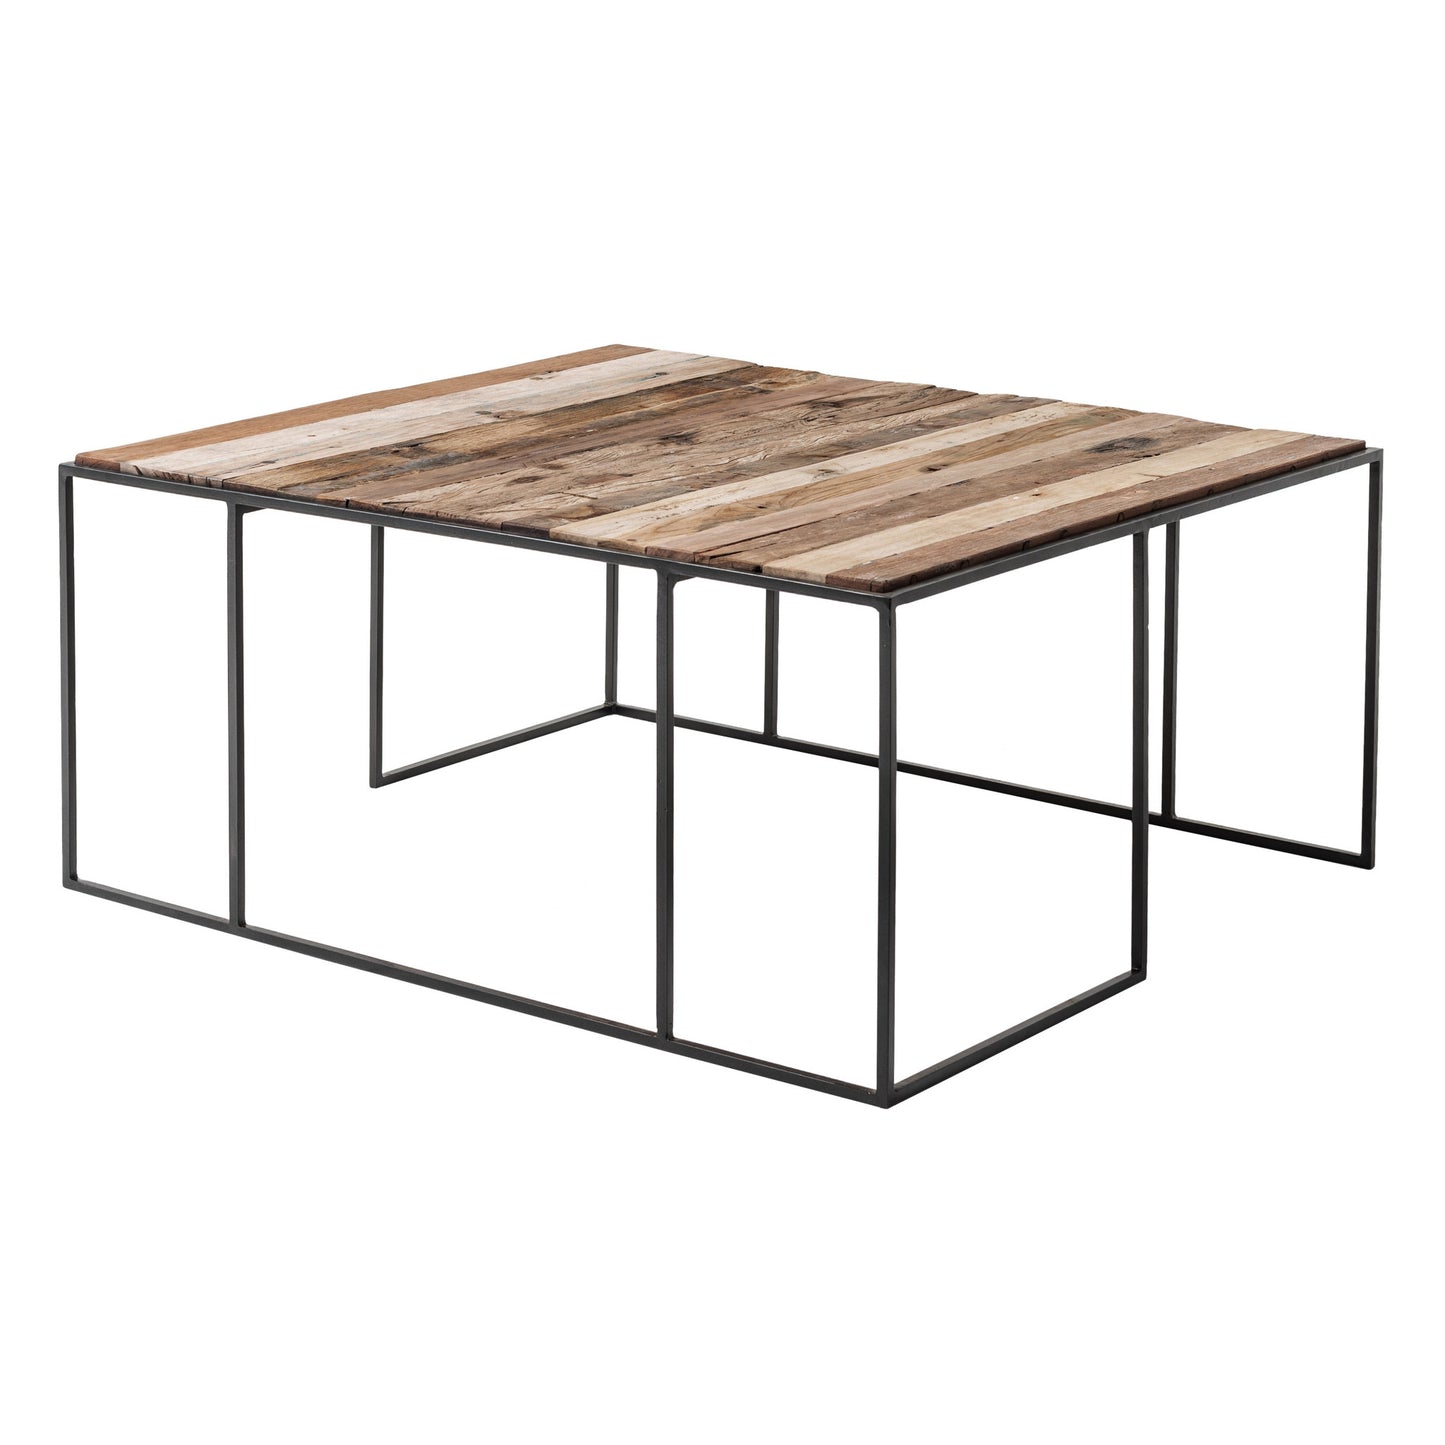 Set of Three Black and Brown Reclaimed Wood And Iron Nested Coffee Tables By Homeroots